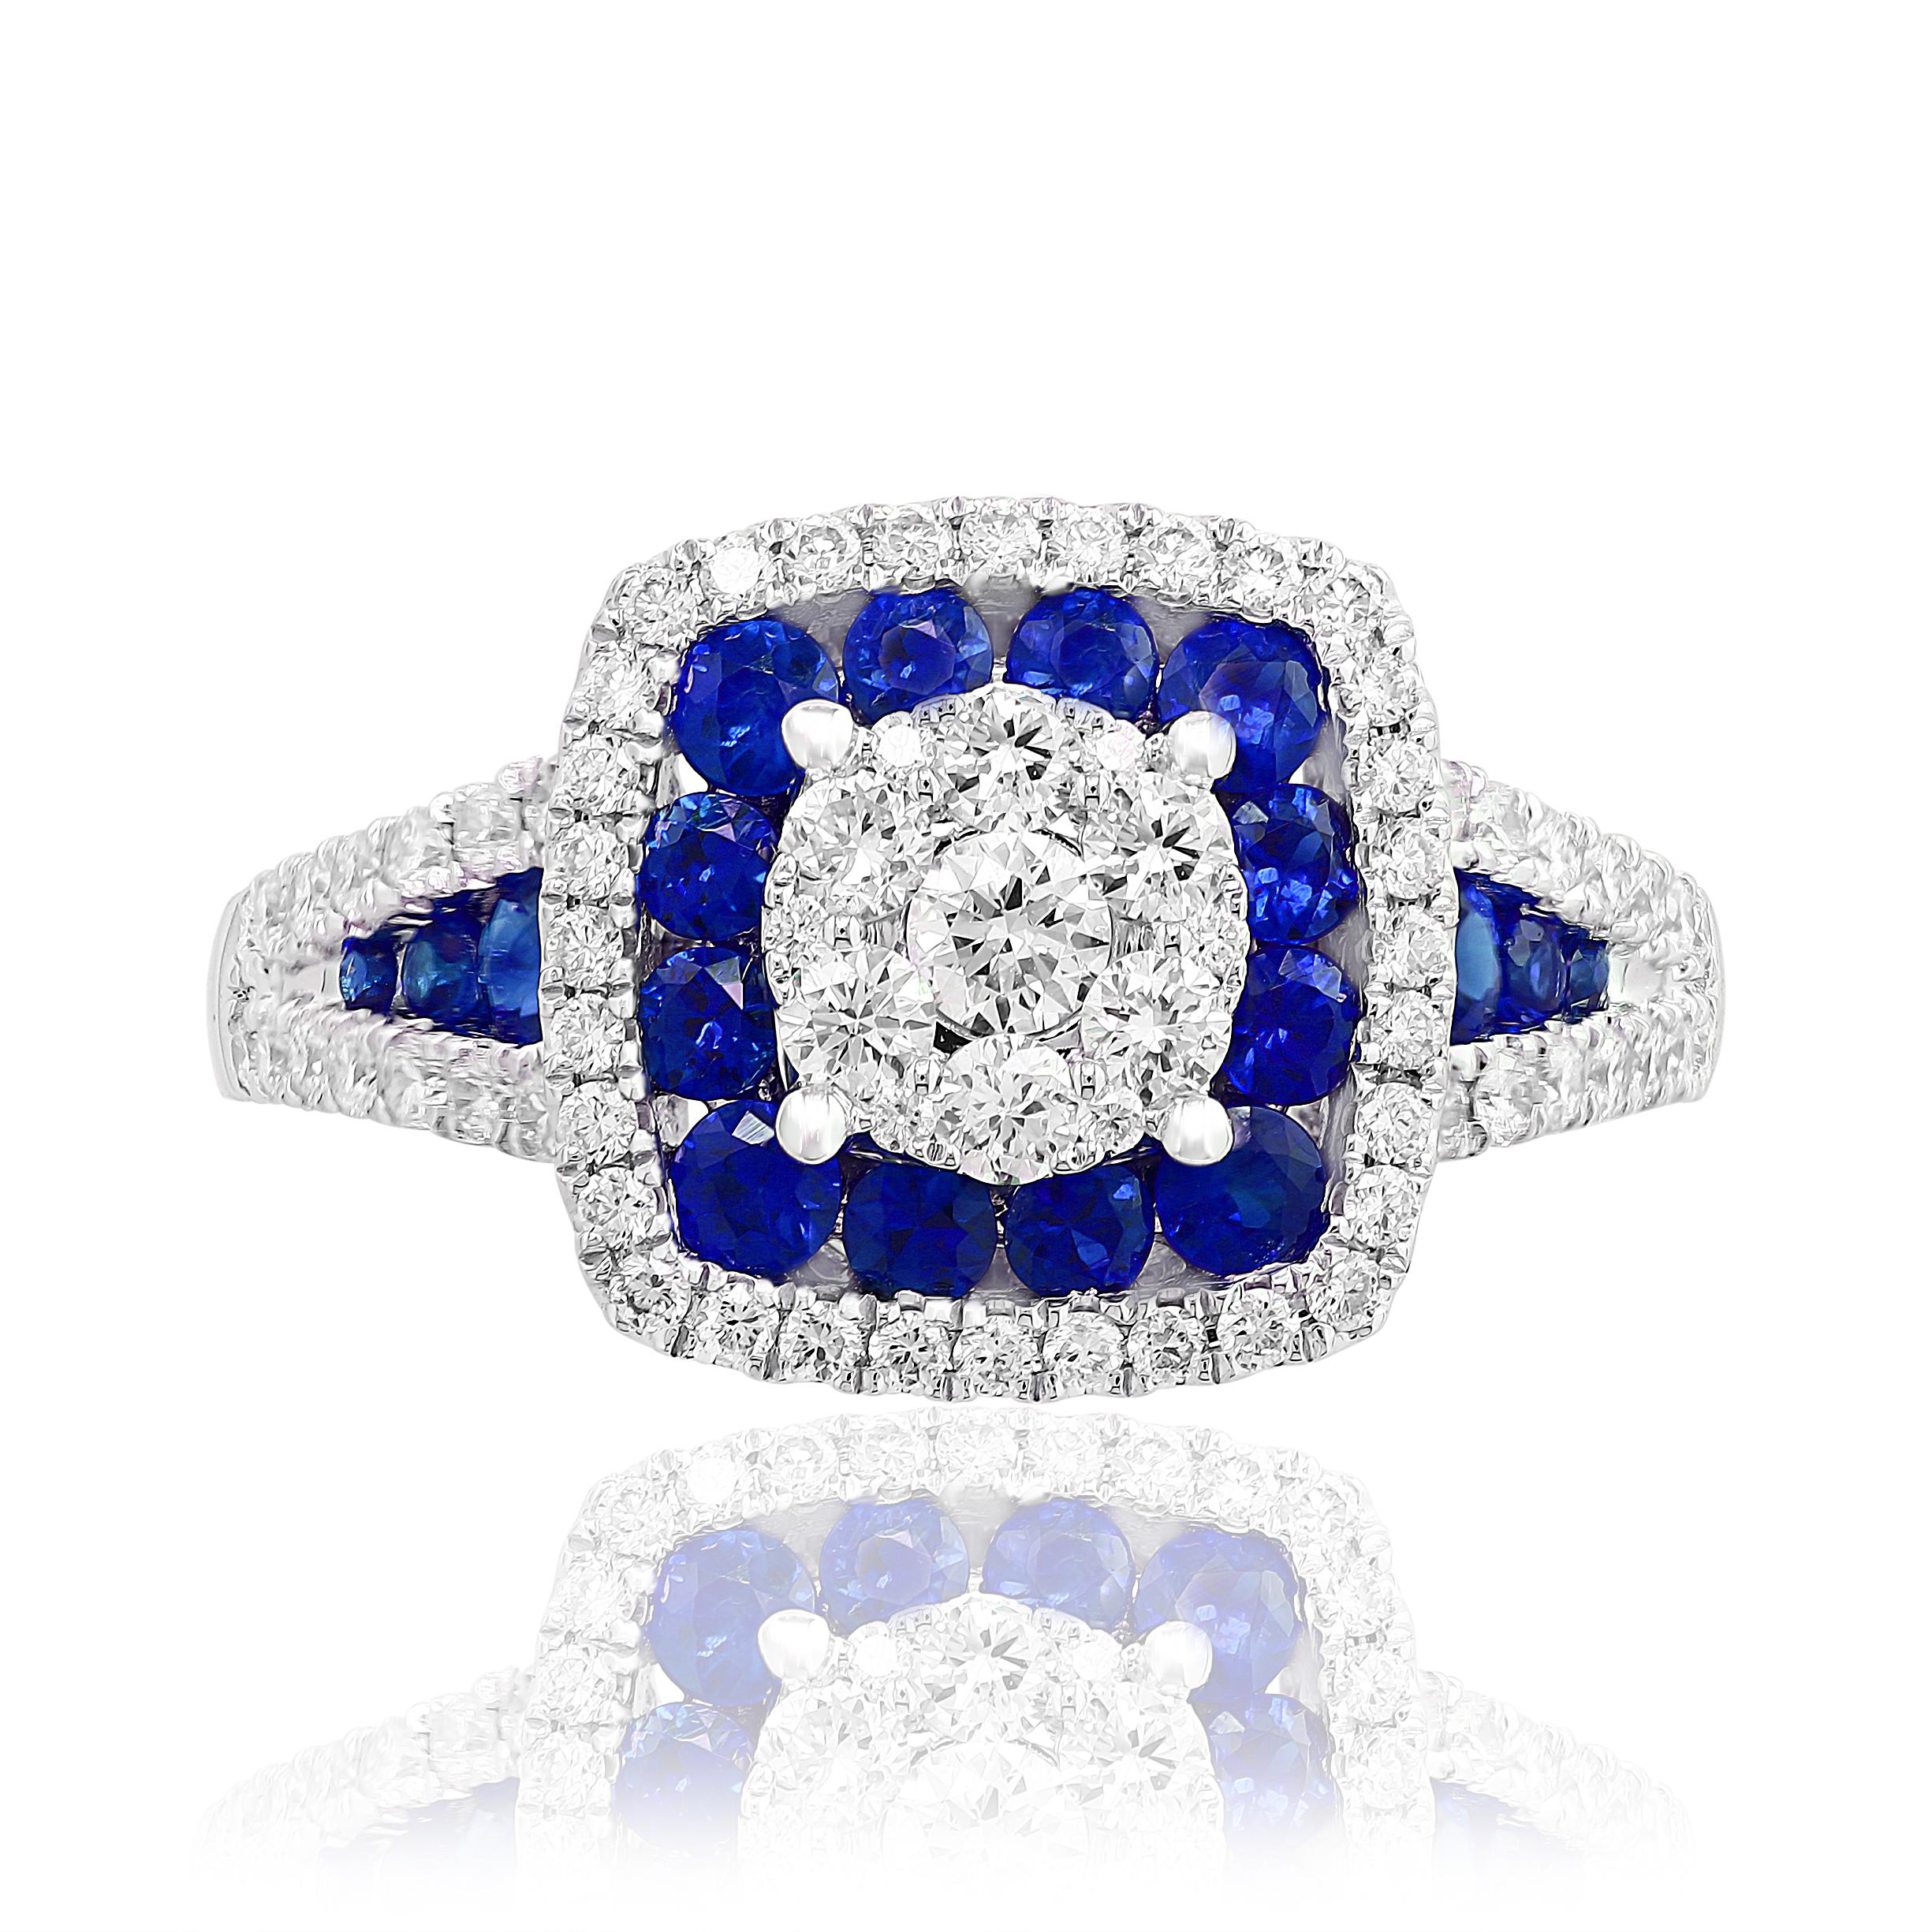 A unique and stylish ring showcasing a cluster of round diamonds in the center surrounded by a row of blue sapphires and another row of diamonds. 18 Blue Sapphires weigh 0.72 carat and 73 diamonds weigh 0.70 carat in total.  Made in 14k white gold.